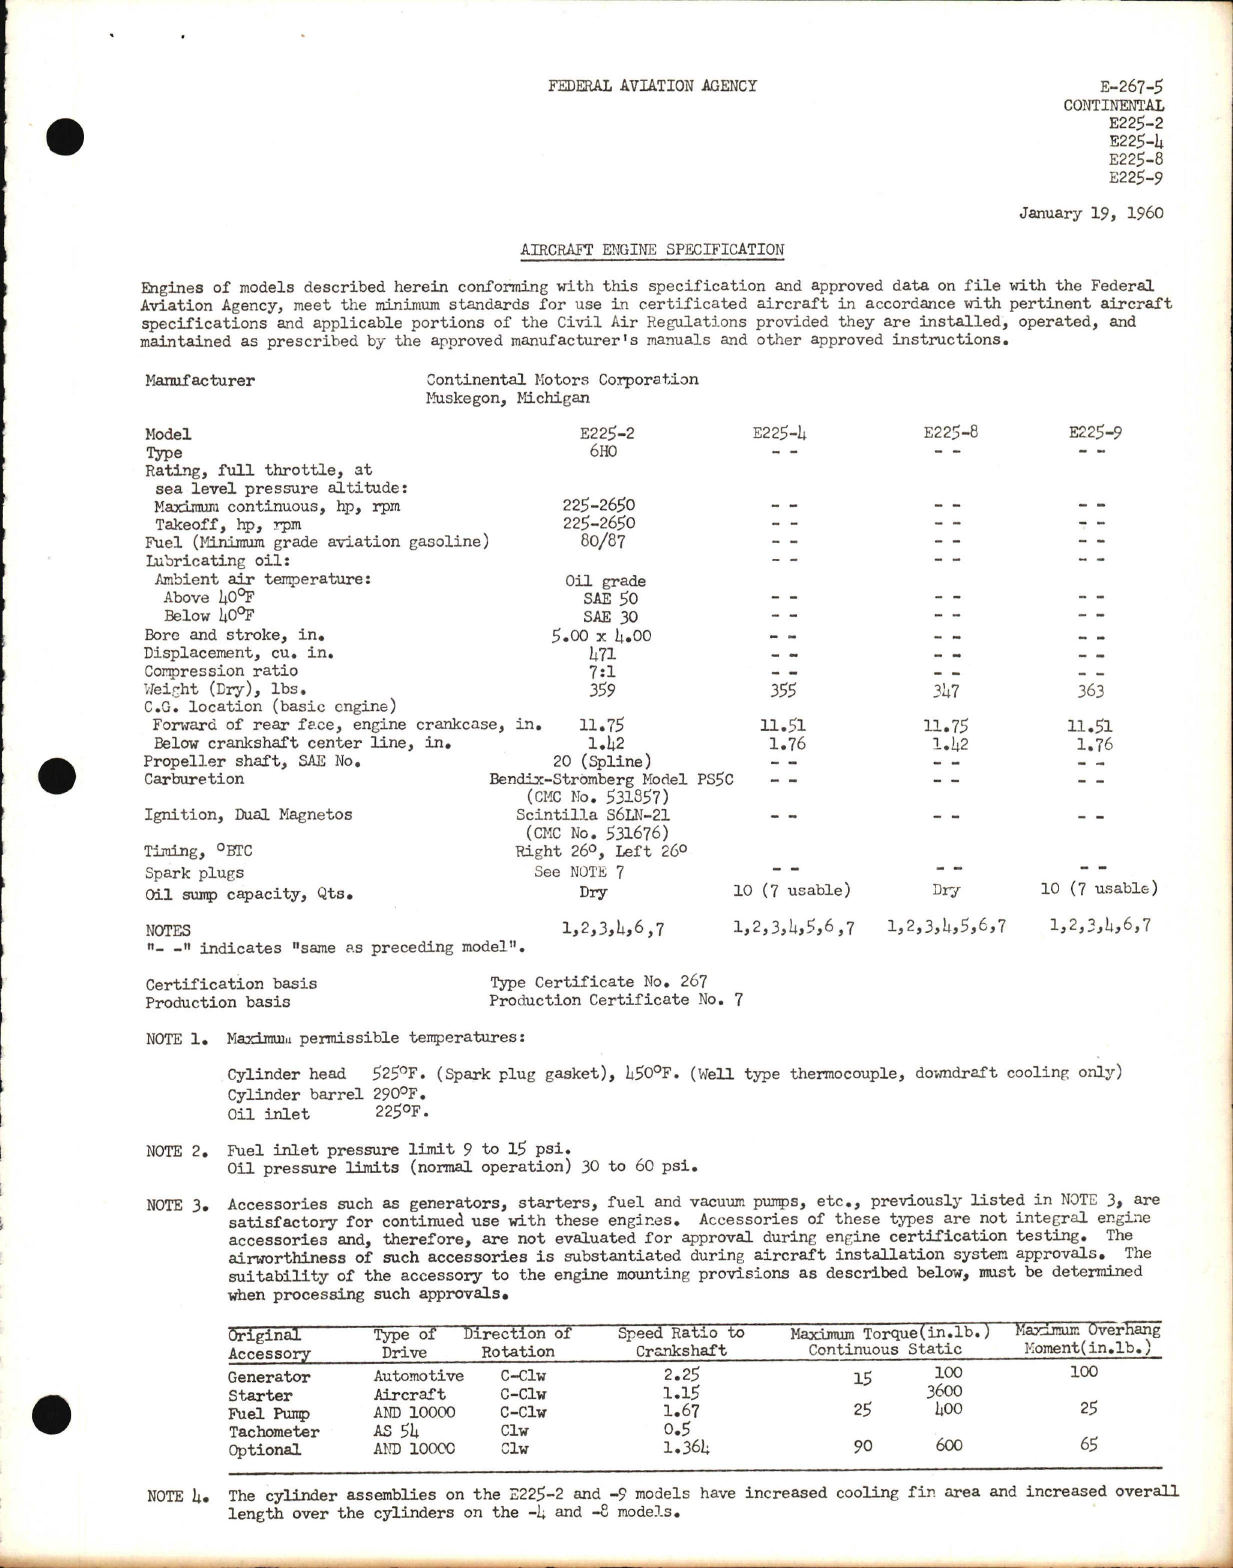 Sample page 1 from AirCorps Library document: E225-2, -4, -8, and -9